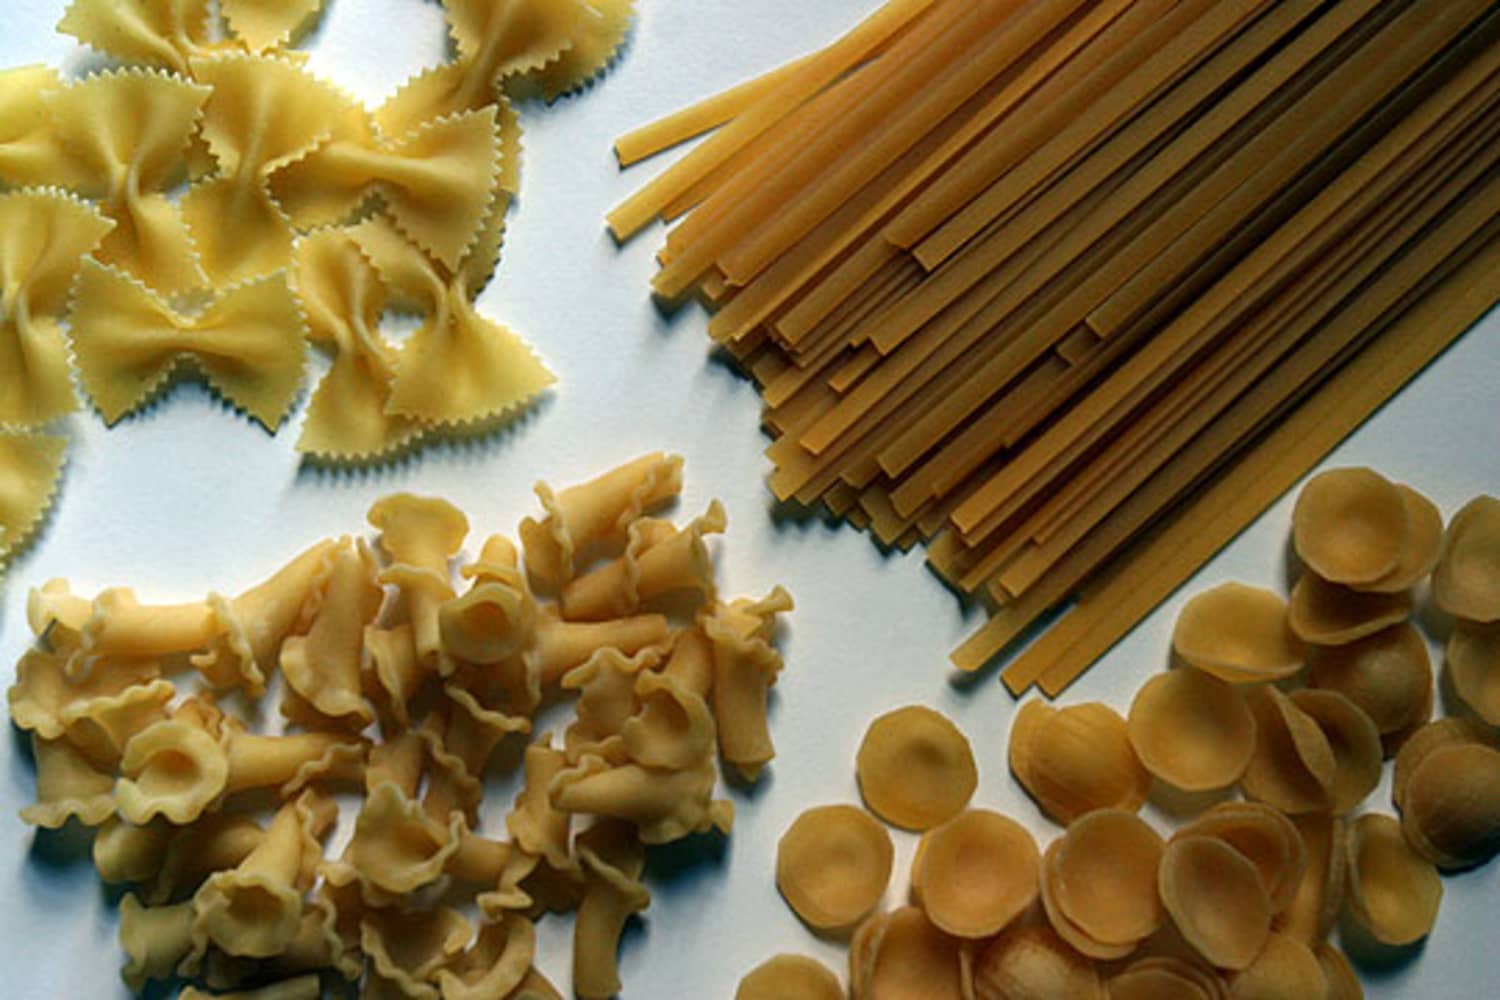 pasta shapes by hand